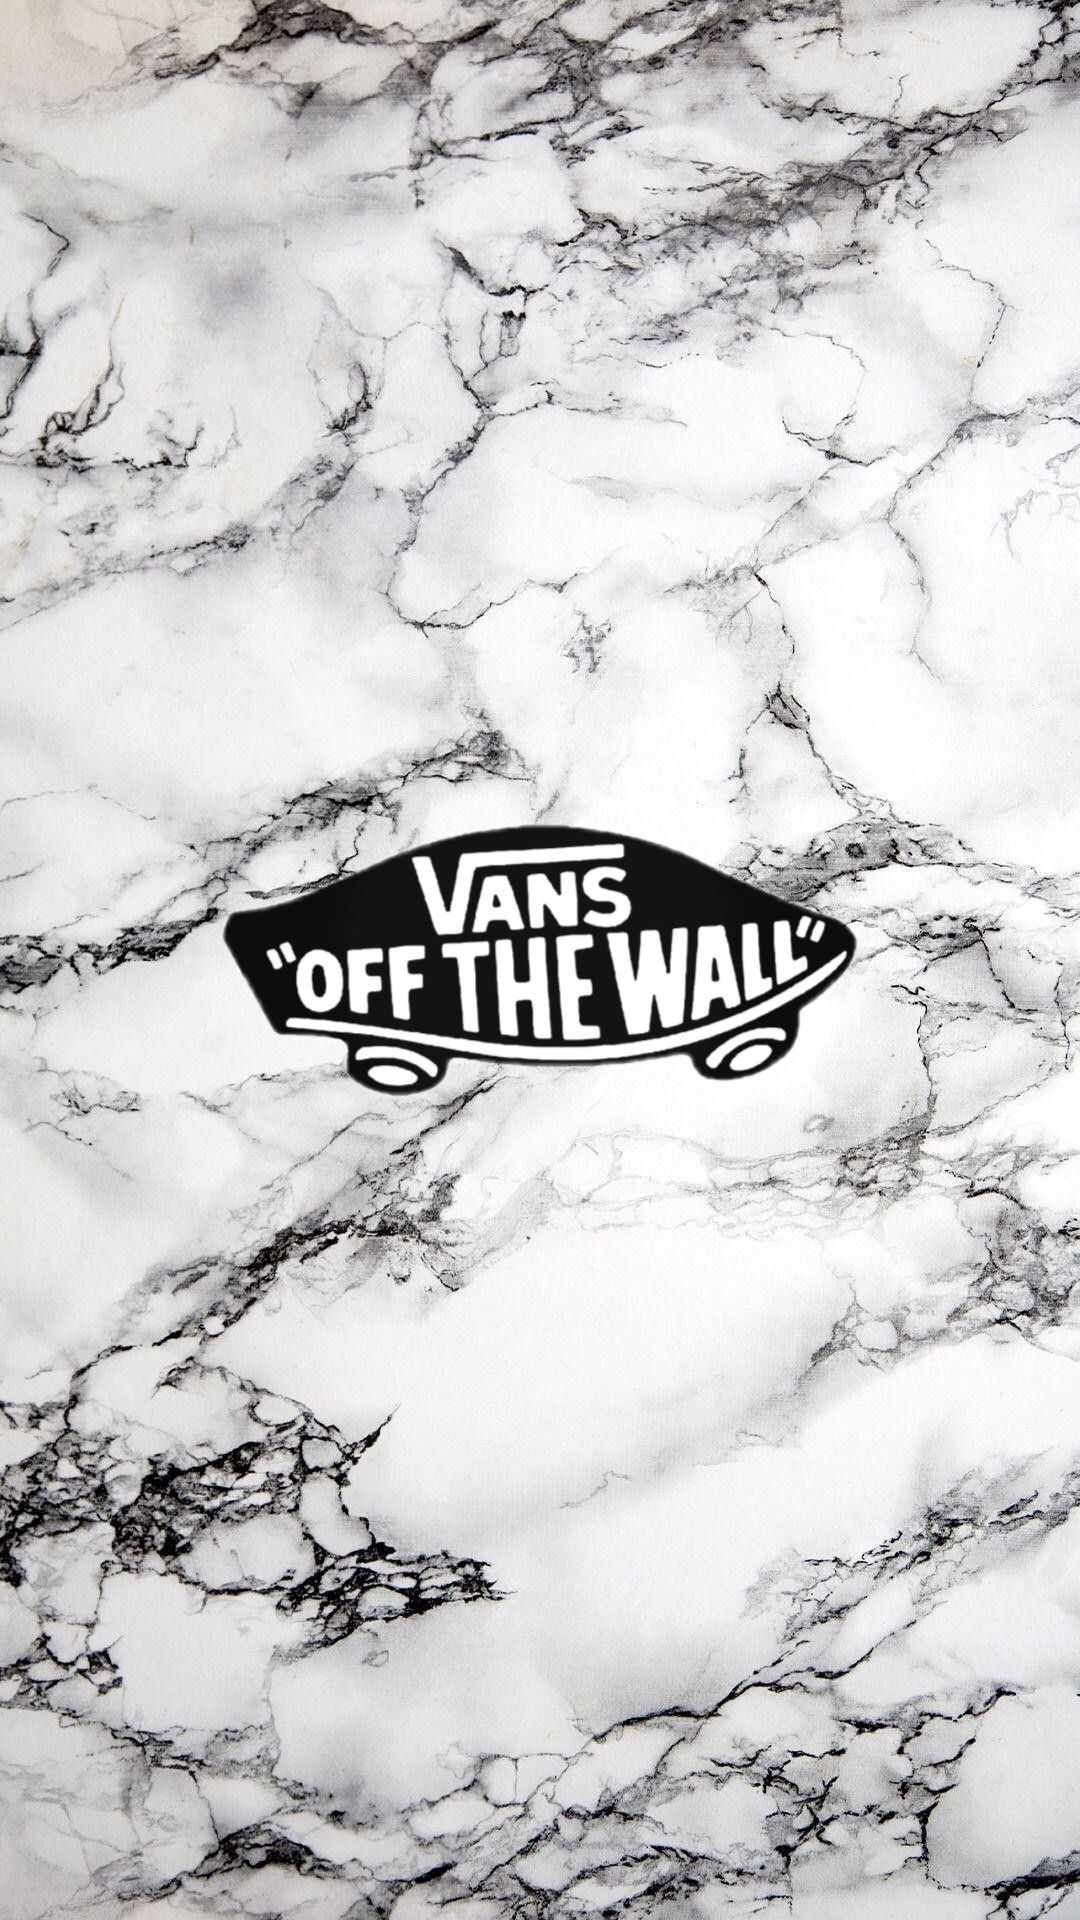 1080x1920 54 Vans off the wall ideas | vans off the wall, vans, off the wall